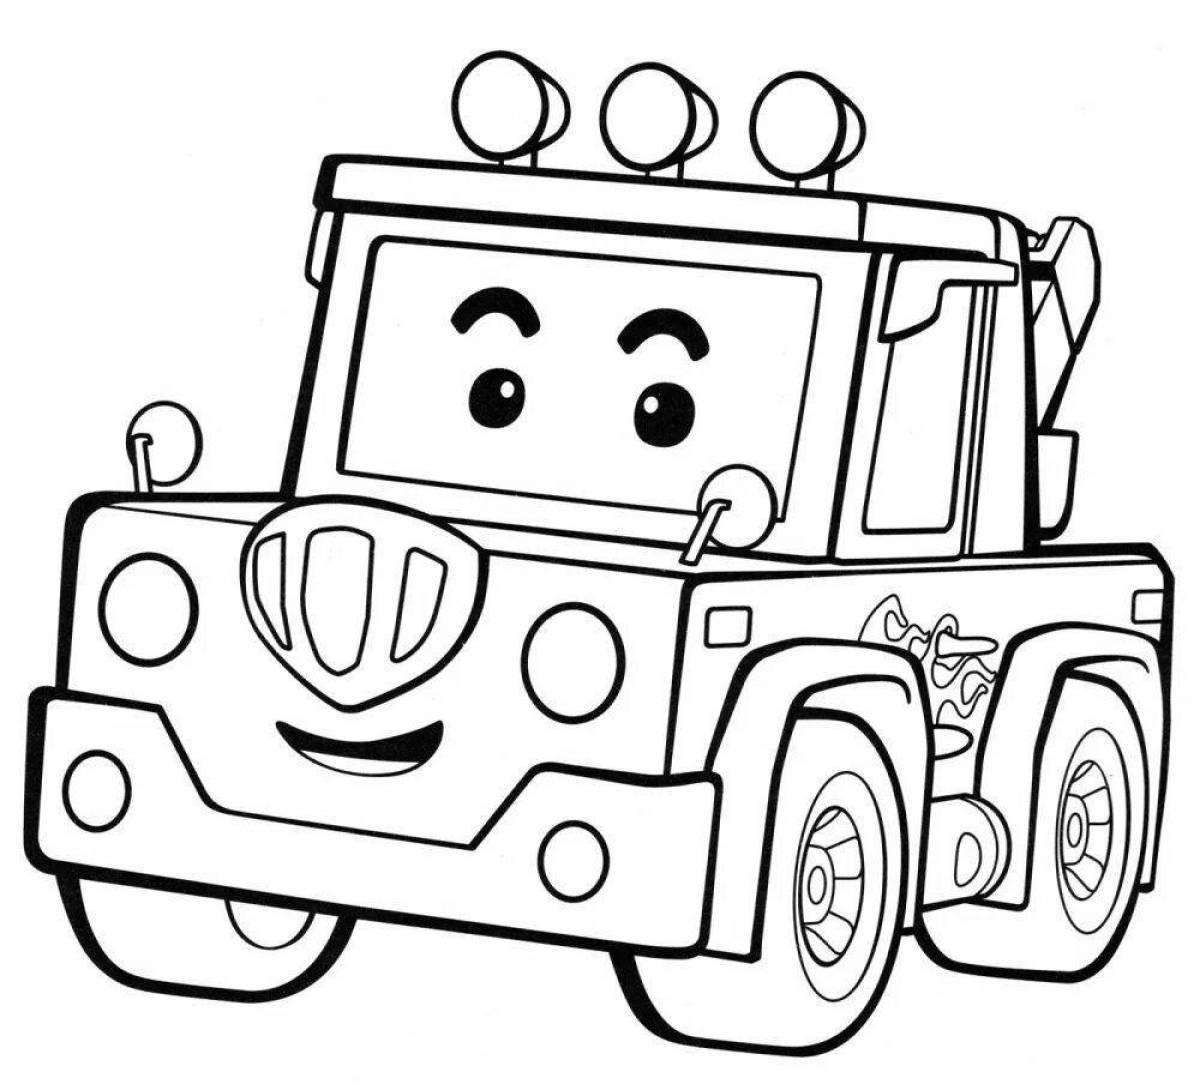 Ember's charming car coloring page